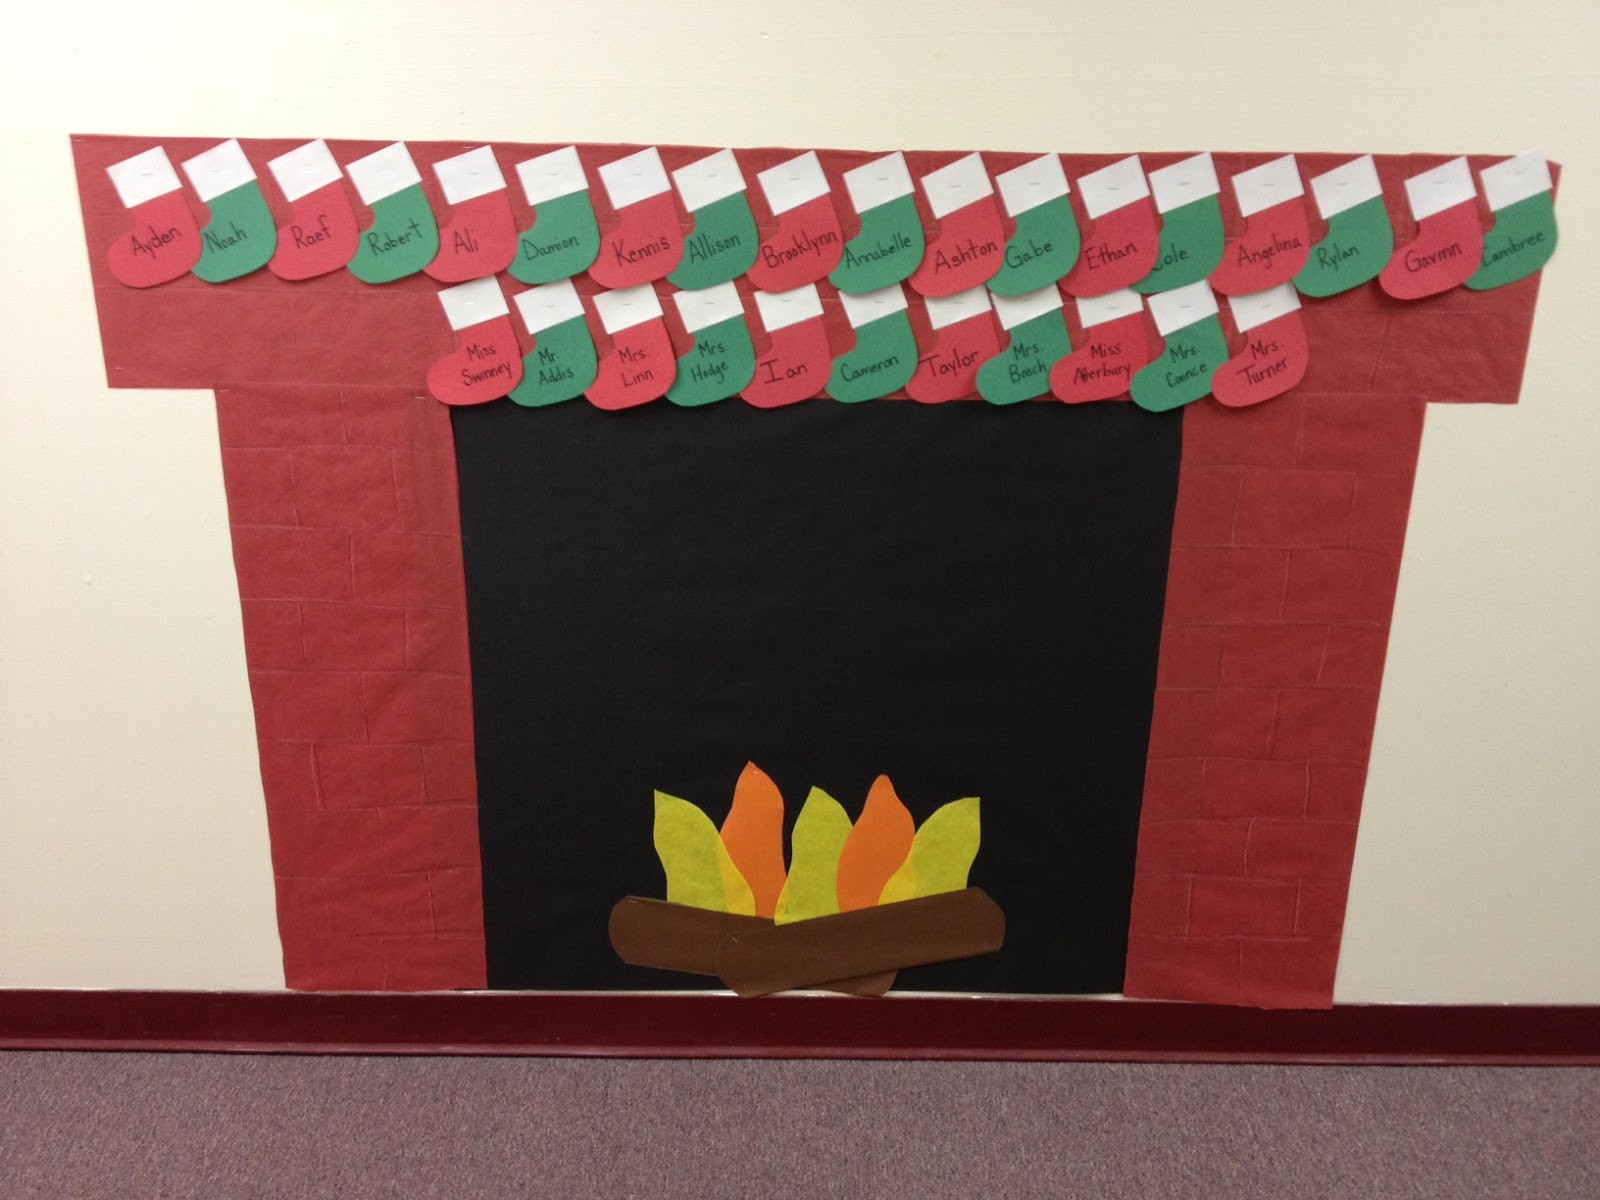 Fireplace Bulletin Board Christmas
 Mrs Hodge and Her Kindergarten Kids Ornaments games and